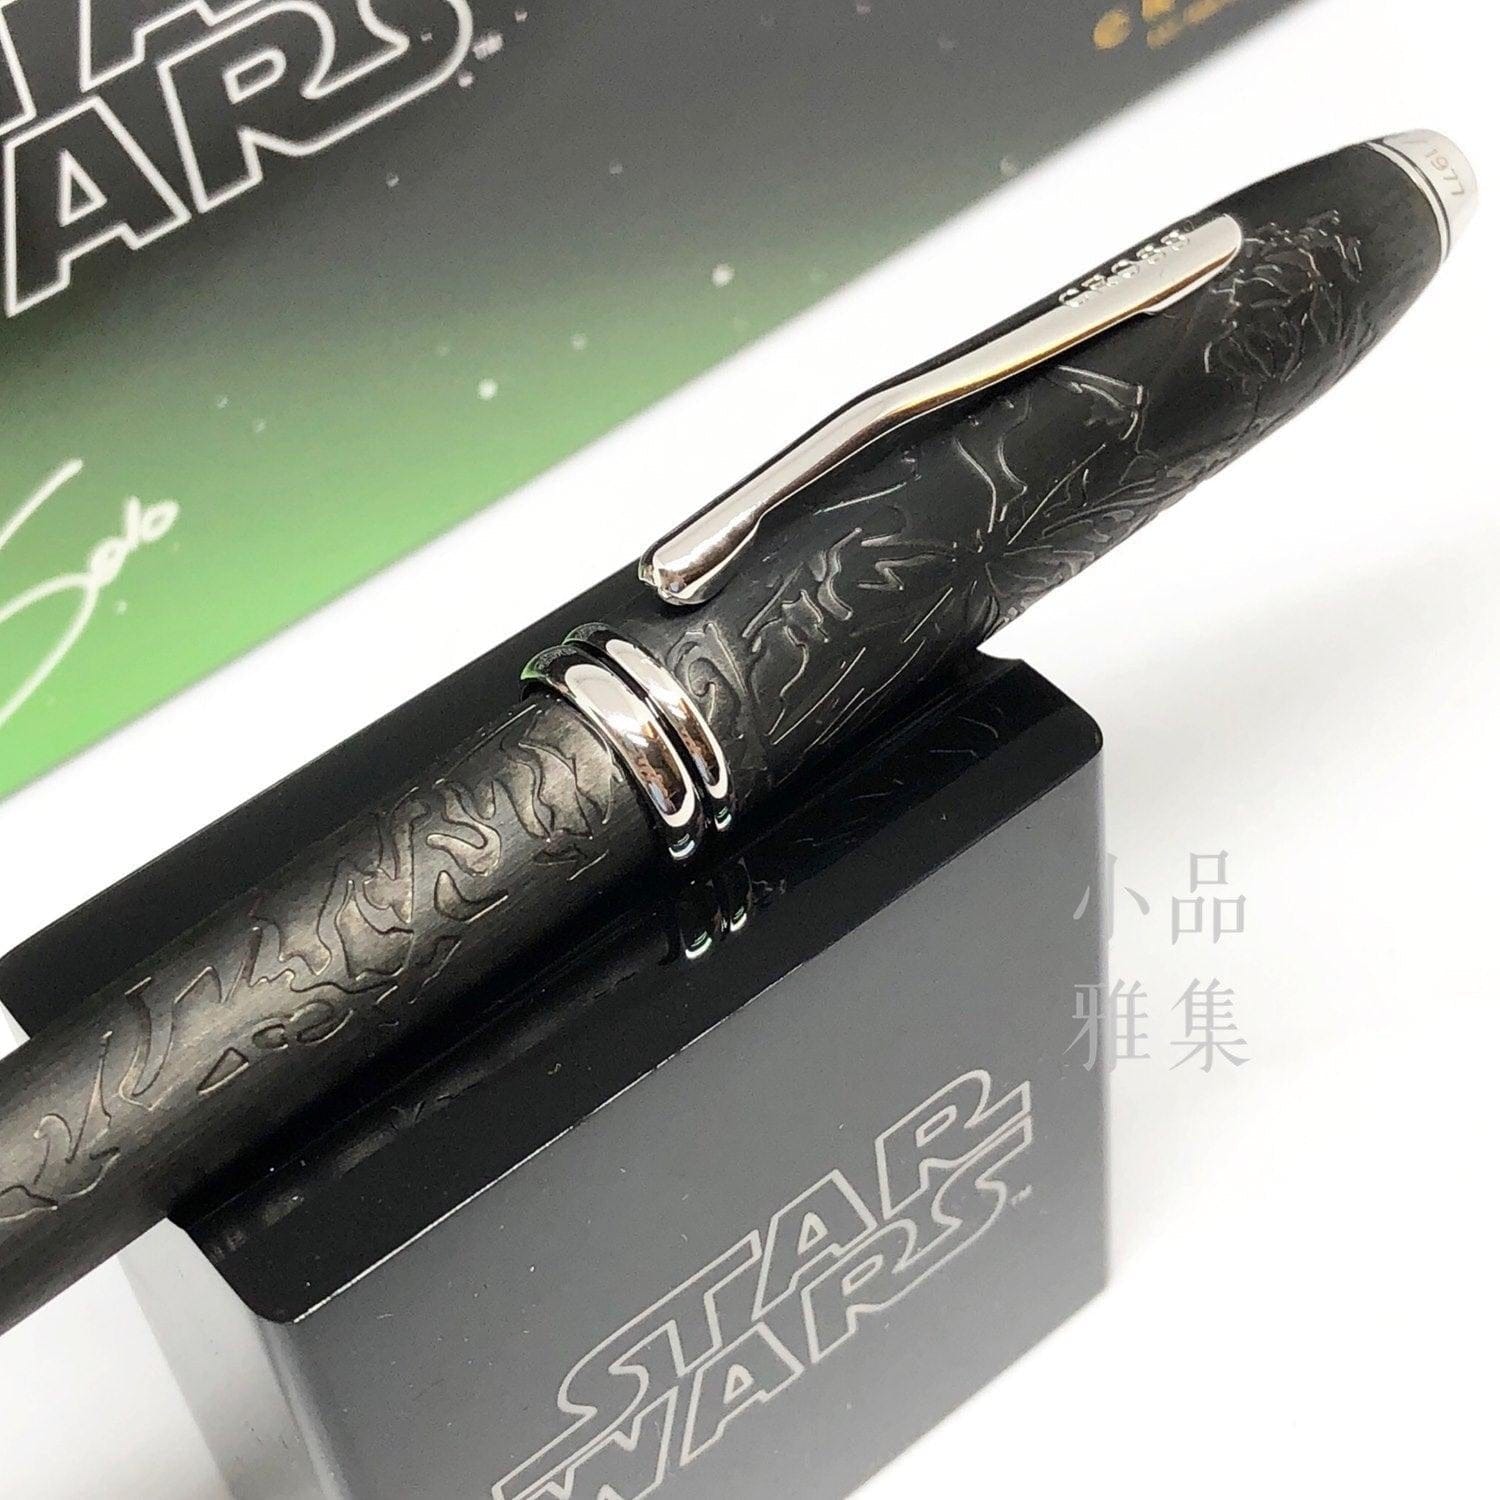 Cross Townsend Rollerball Pen - Star Wars Han Solo (Limited Edition)